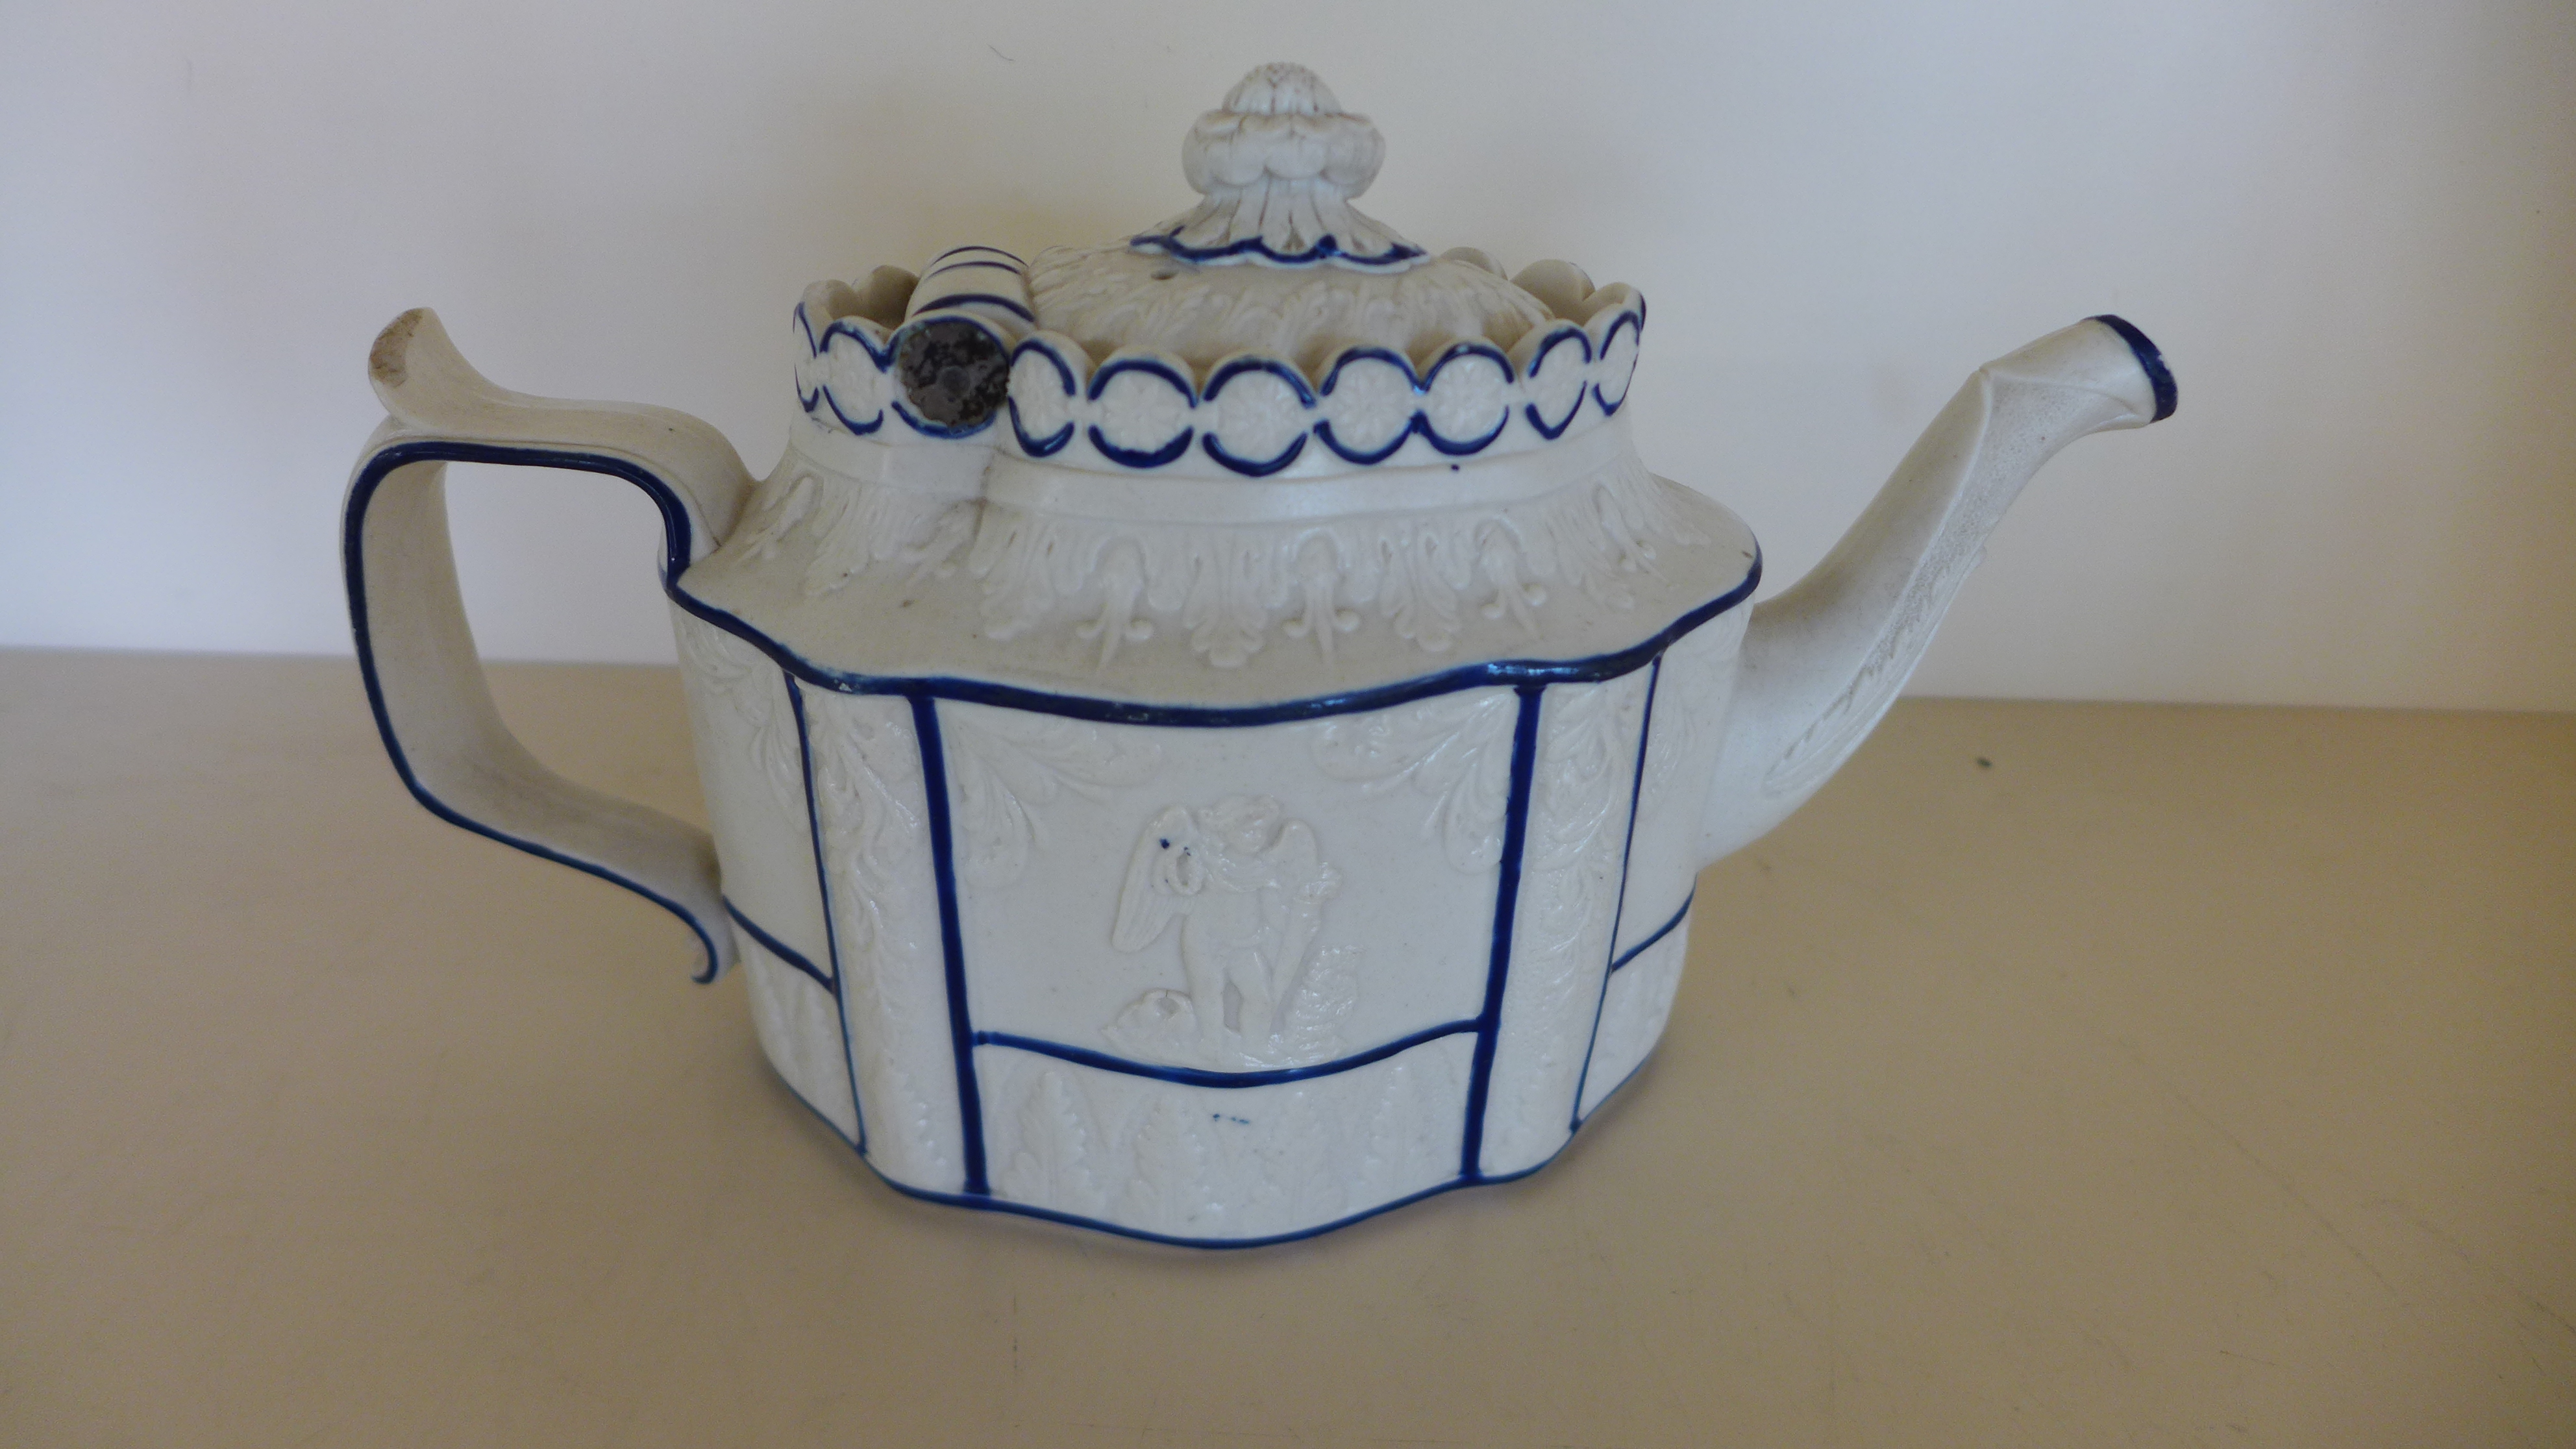 A 19th century Castleford type teapot with hinged cover and classical decoration - crack to body, - Image 2 of 2